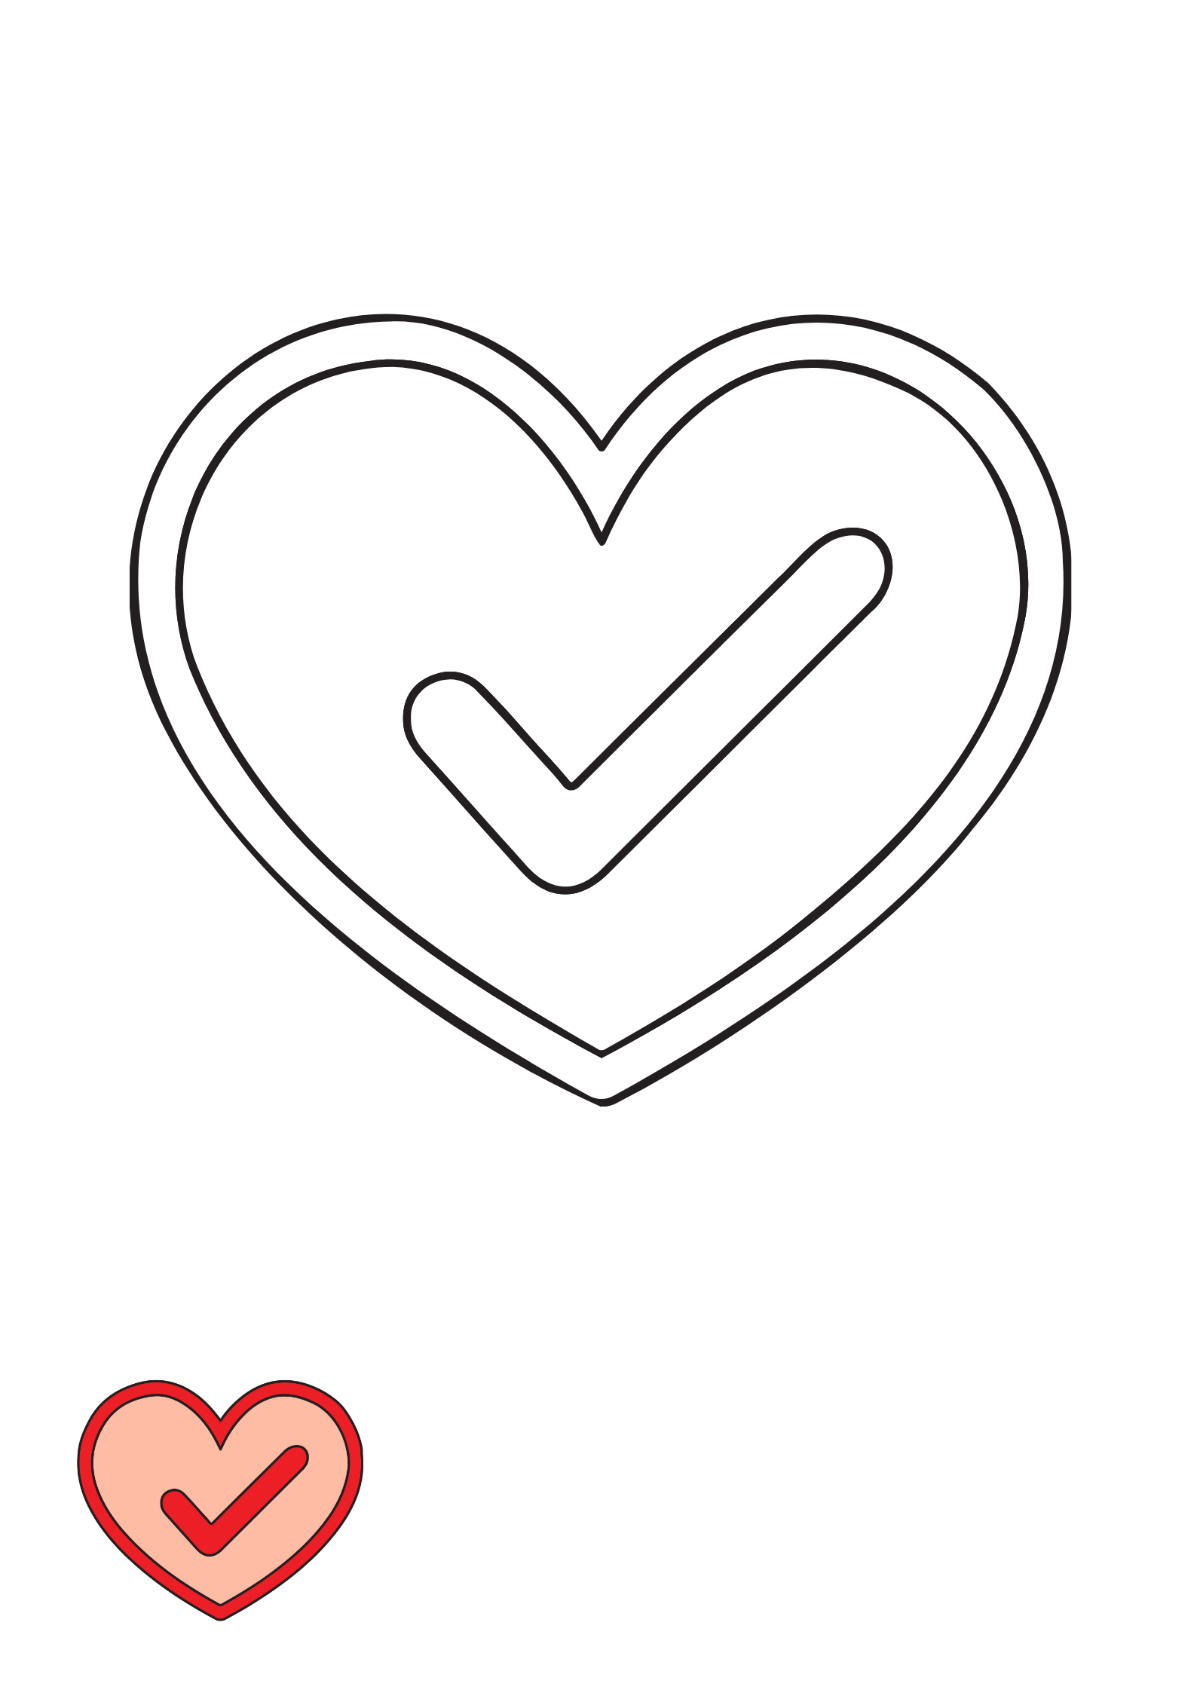 Free Heart Check Mark coloring page Template